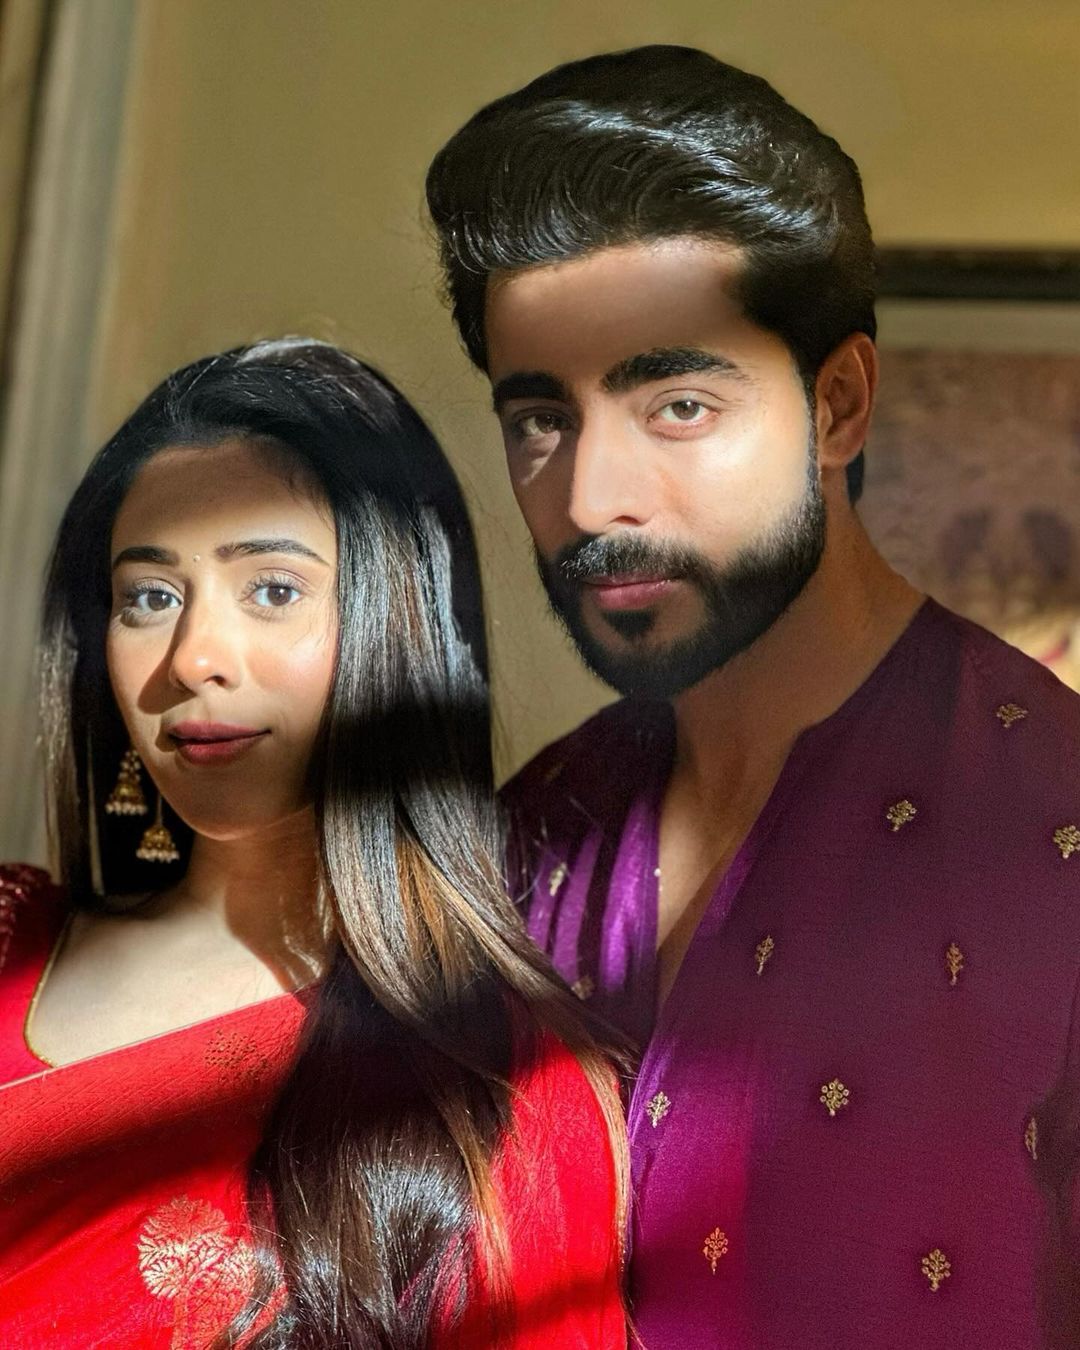 Jhanak Spoiler: Whether Anirudh is going to tell Rahul about how his feelings for Jhanak or not; Rahul is in an electrifying shock at knowing that Anirudh is in love with Jhanak